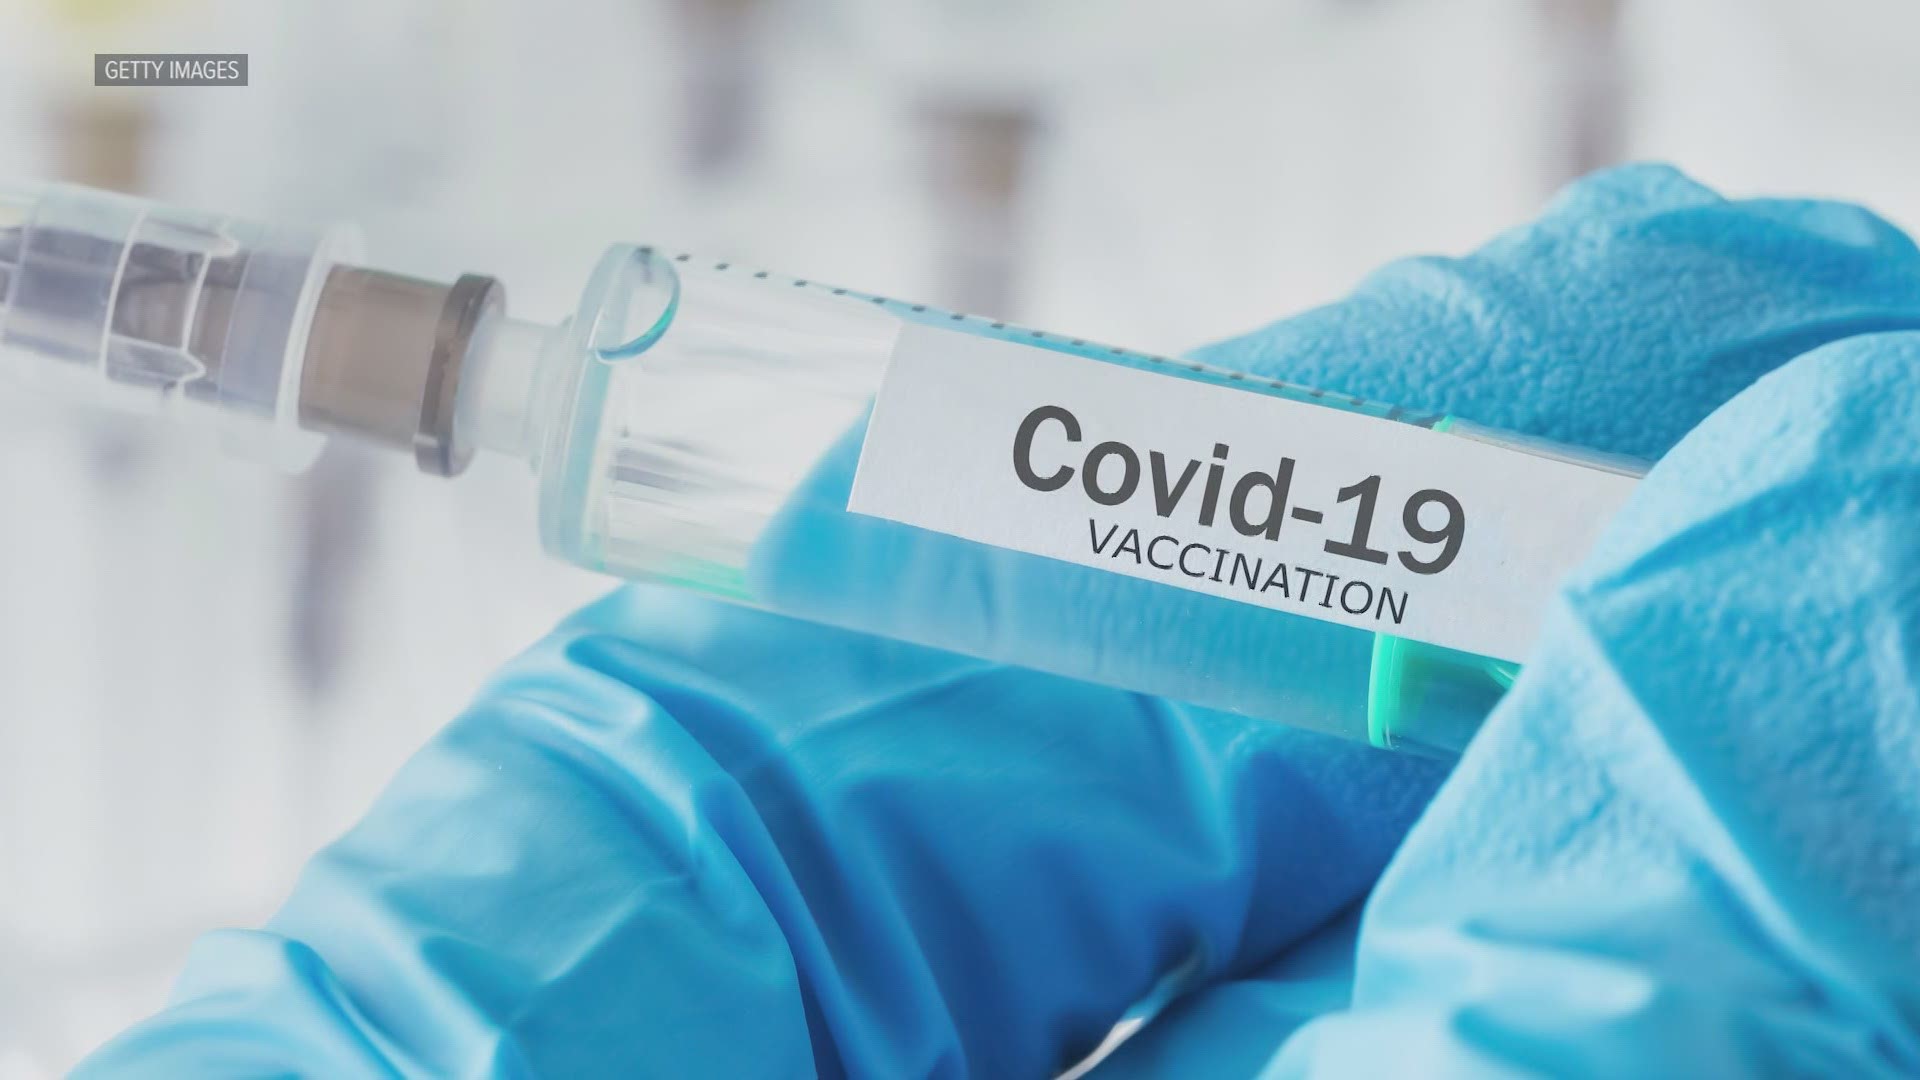 Over 160,000 teachers and school staff are now eligible to receive the COVID-19 vaccine in an effort to return students to in-person learning